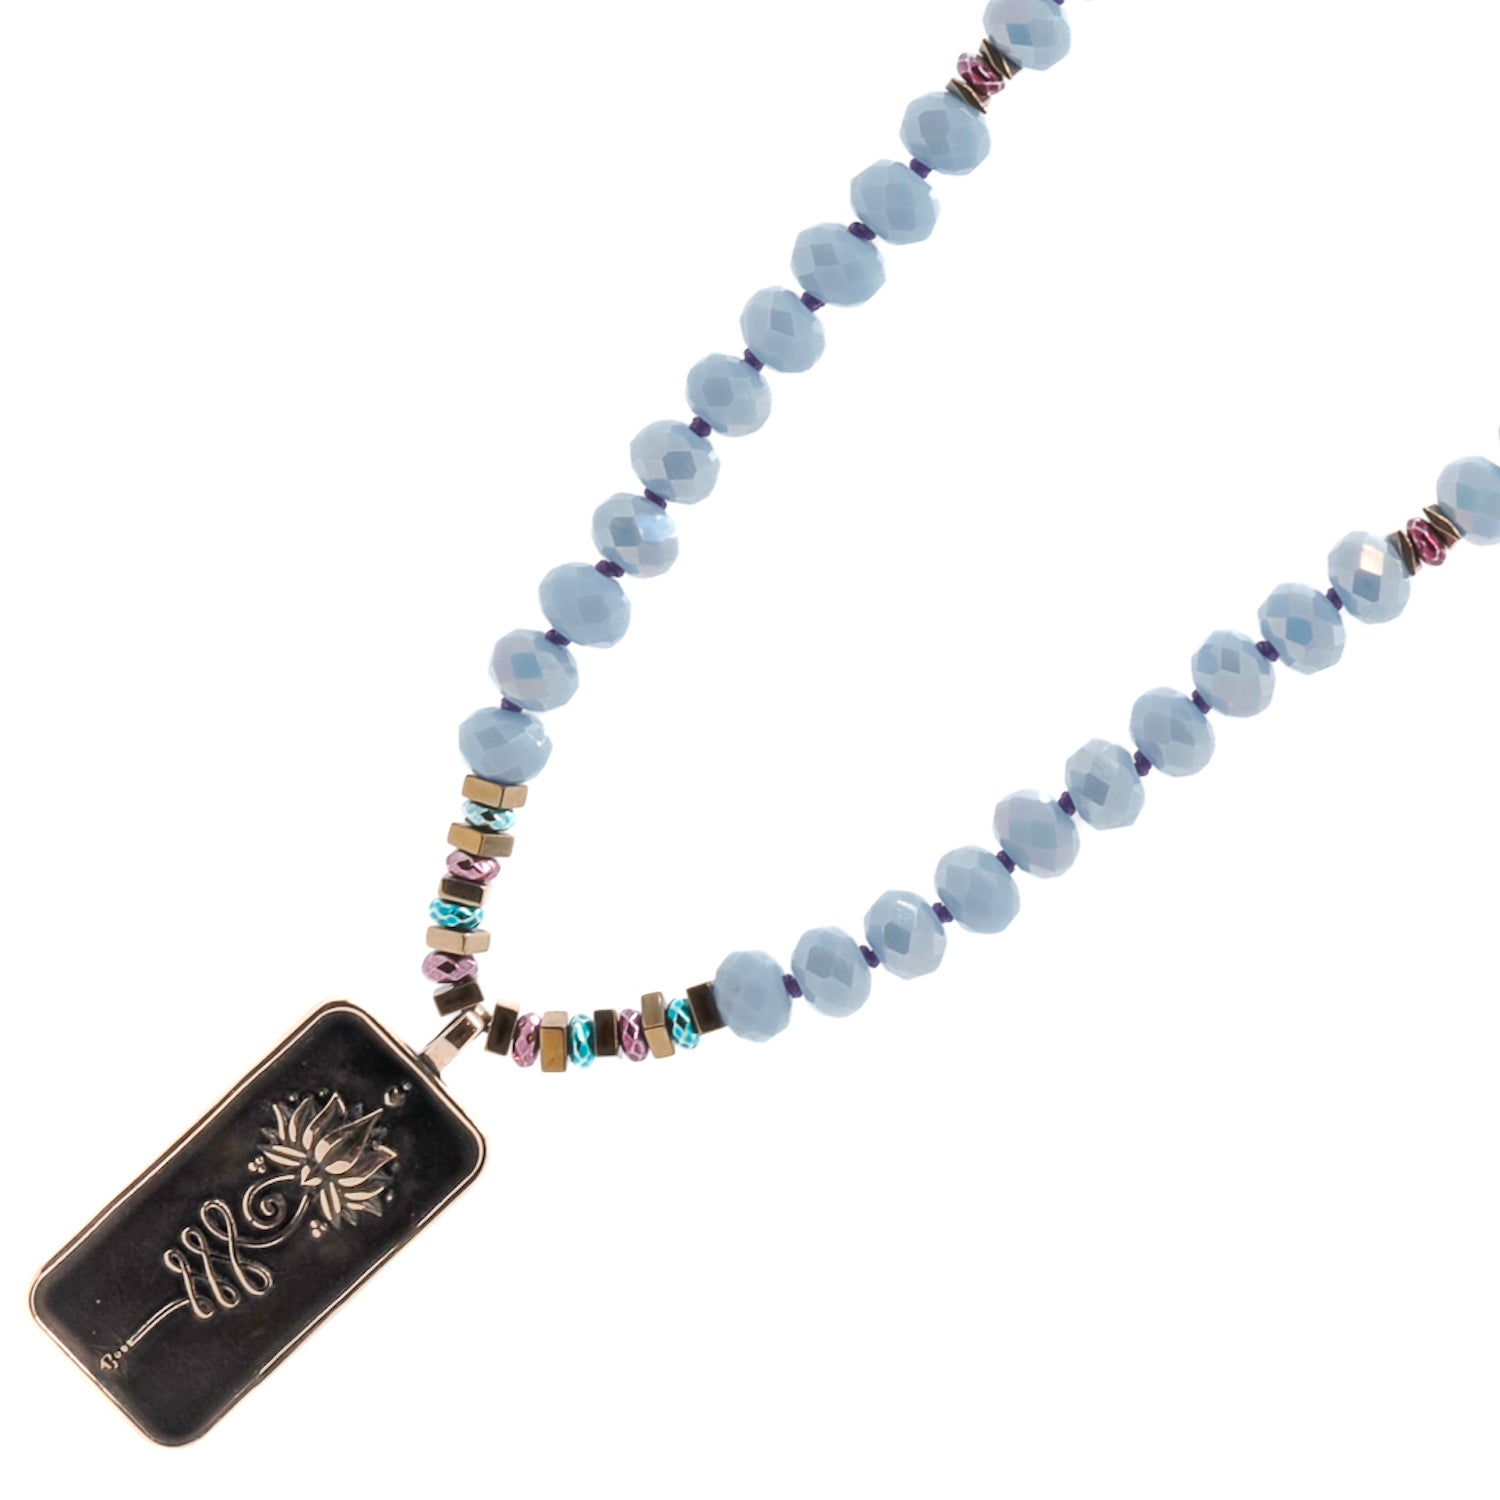 Find Inner Light - The Unalome Self Love Necklace Inspires Self-Discovery and Inner Peace.